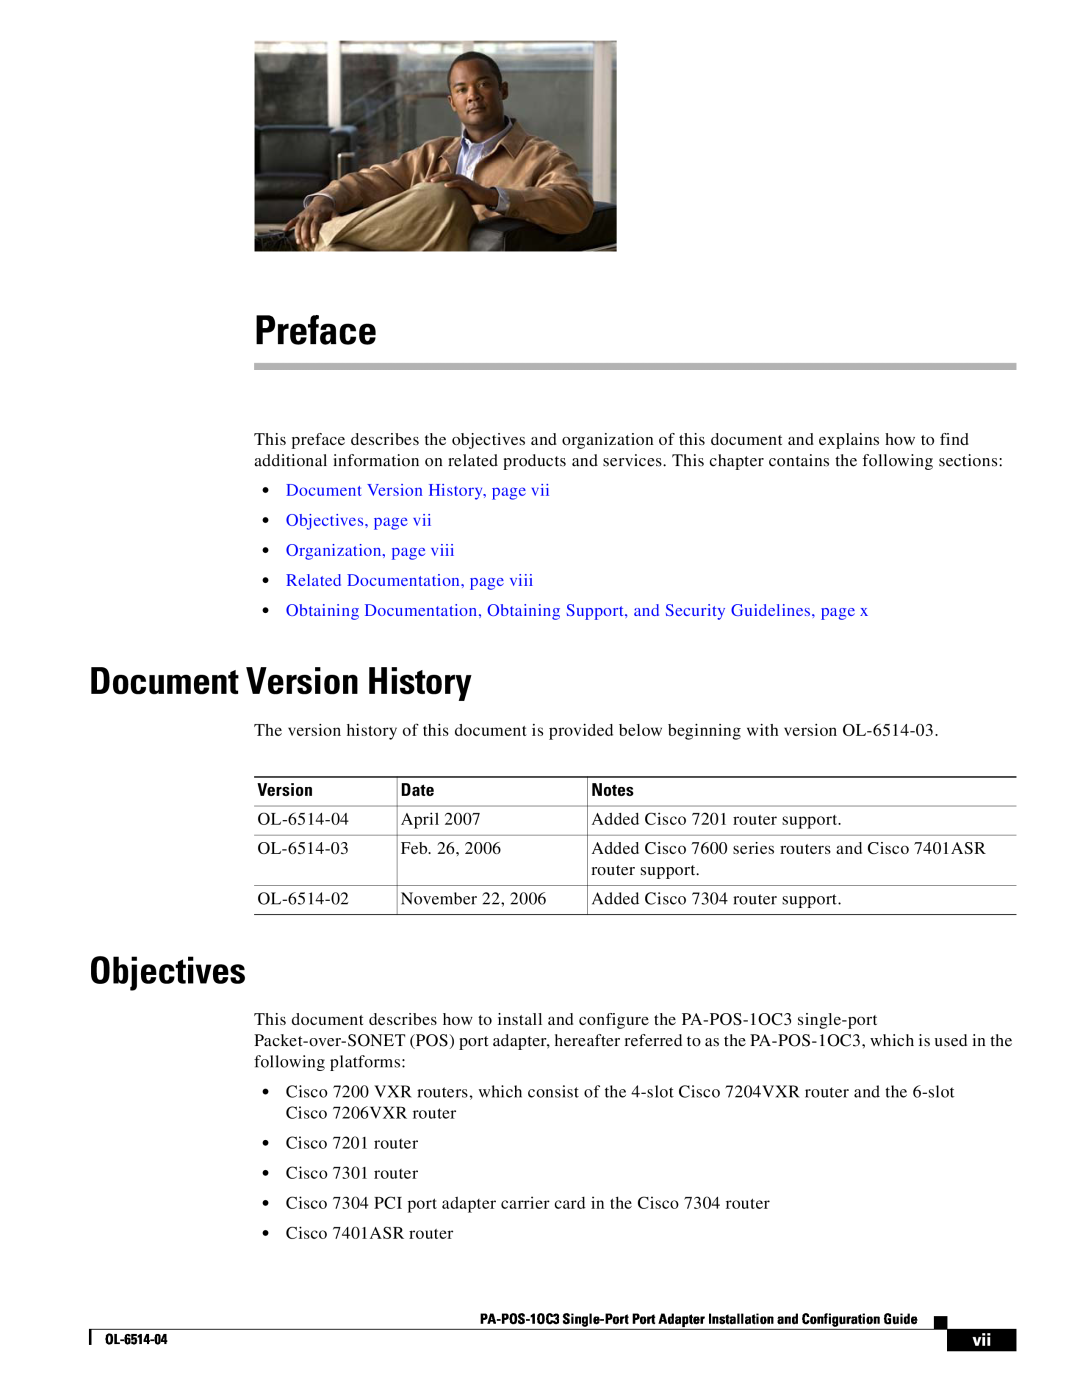 Cisco Systems PA-POS-1OC3, PA-POS-2OC3 Preface, Document Version History, Objectives, Related Documentation, page, Date 